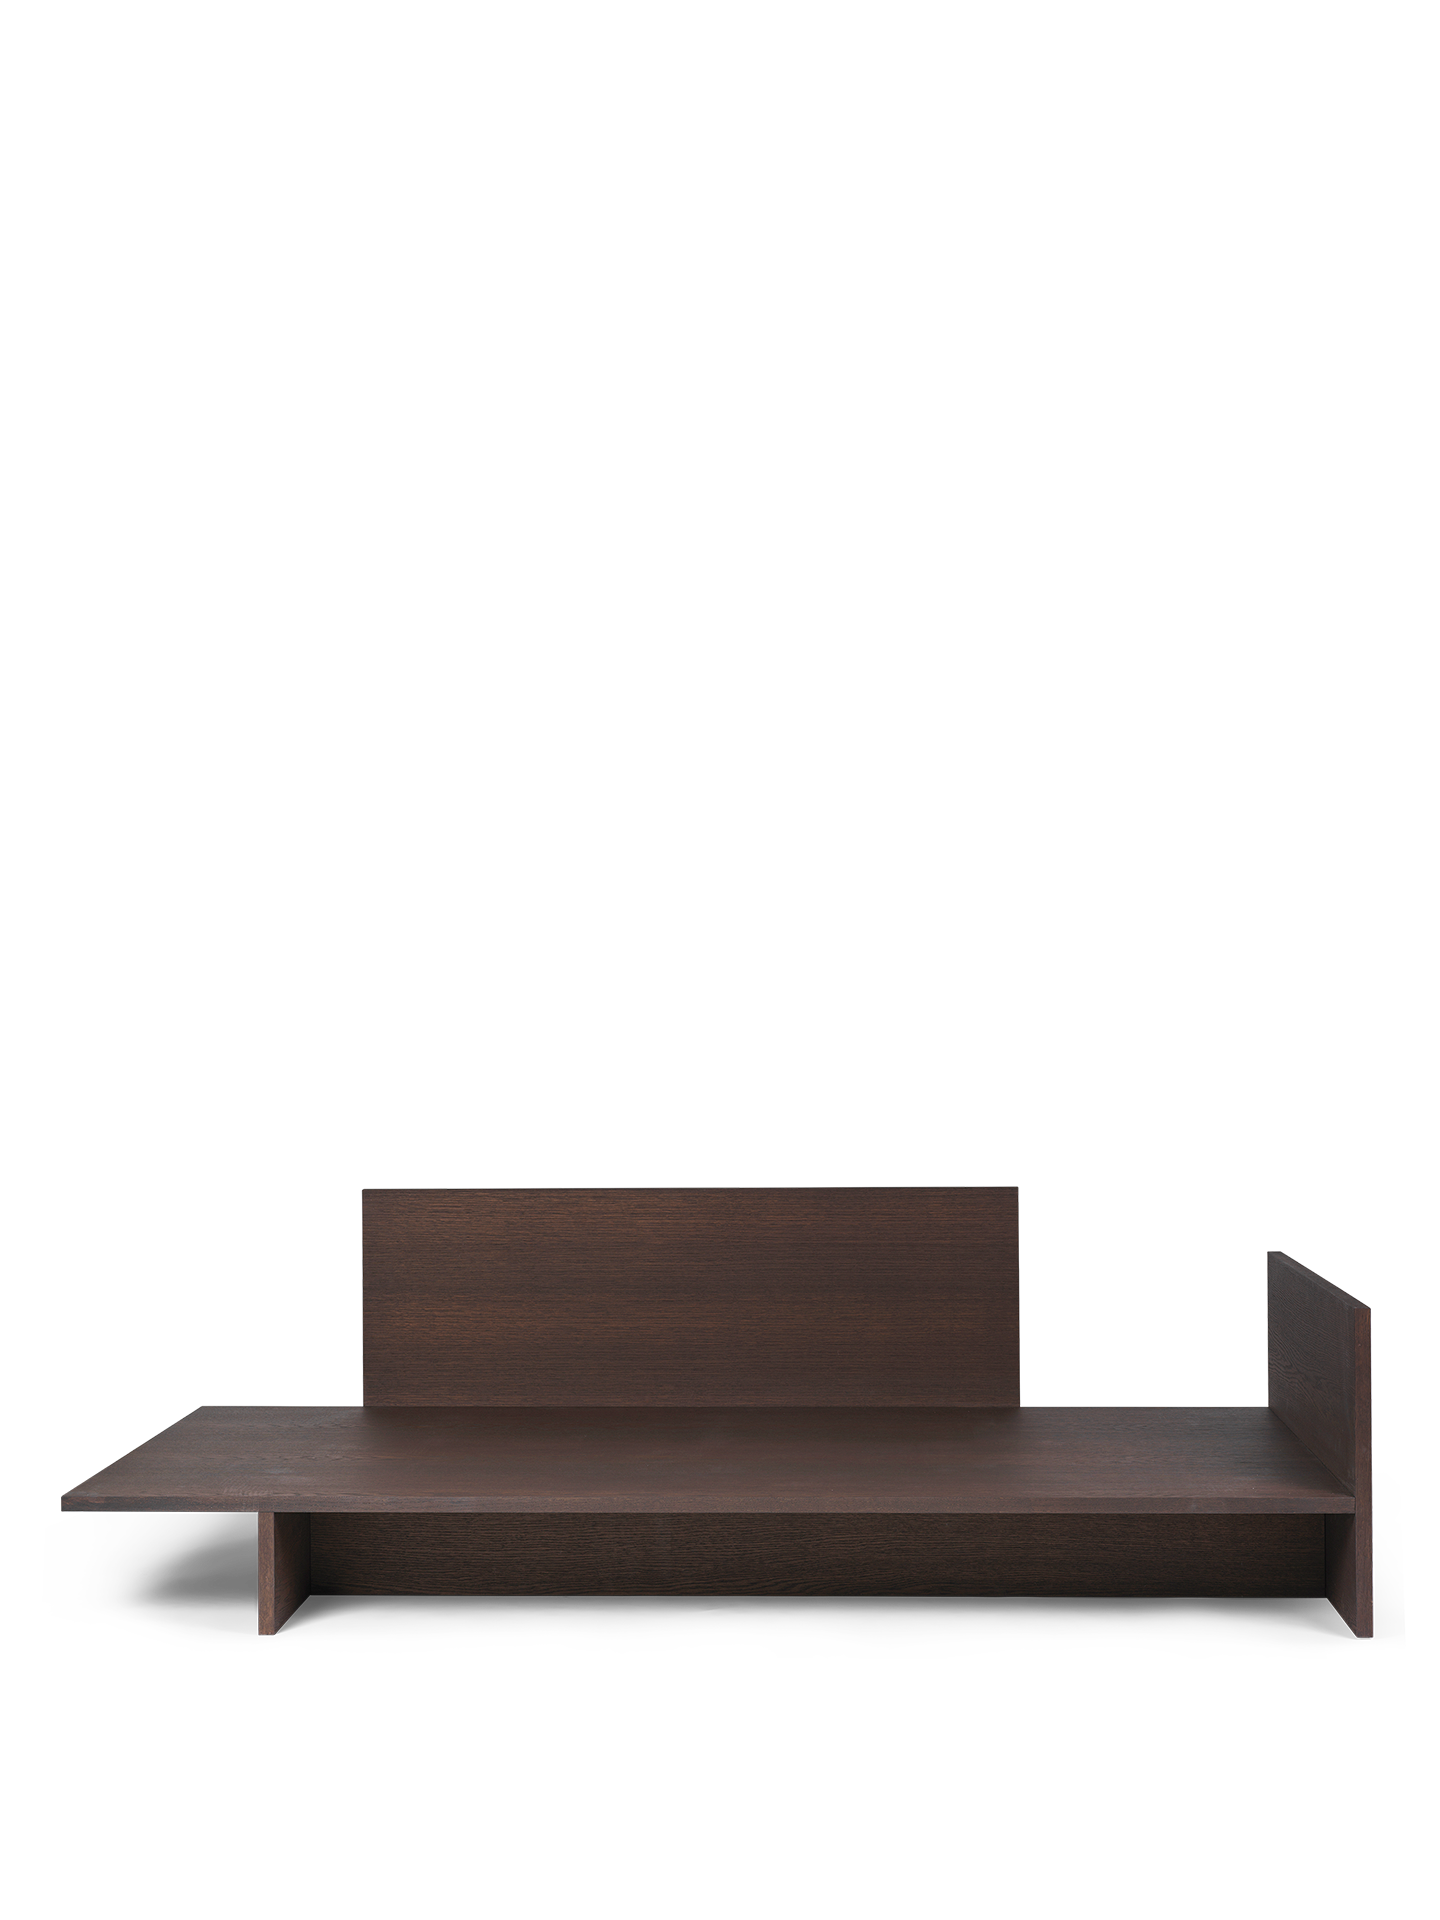 Ferm Living Kona Bed Dark Stained